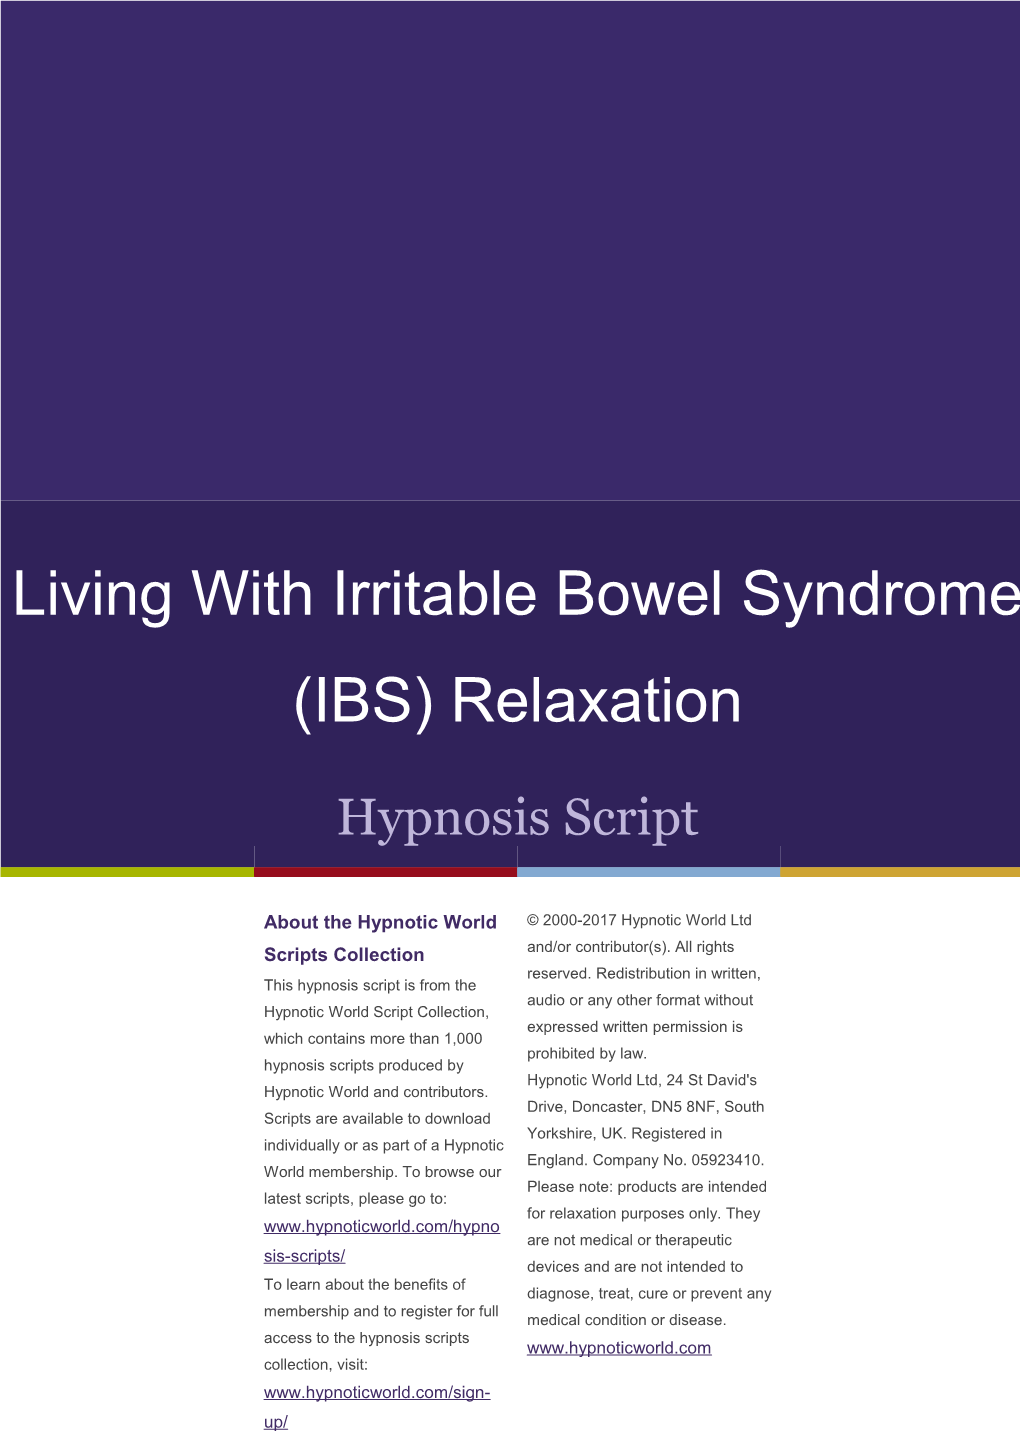 Living with Irritable Bowel Syndrome (IBS) Relaxation Hypnosis Script